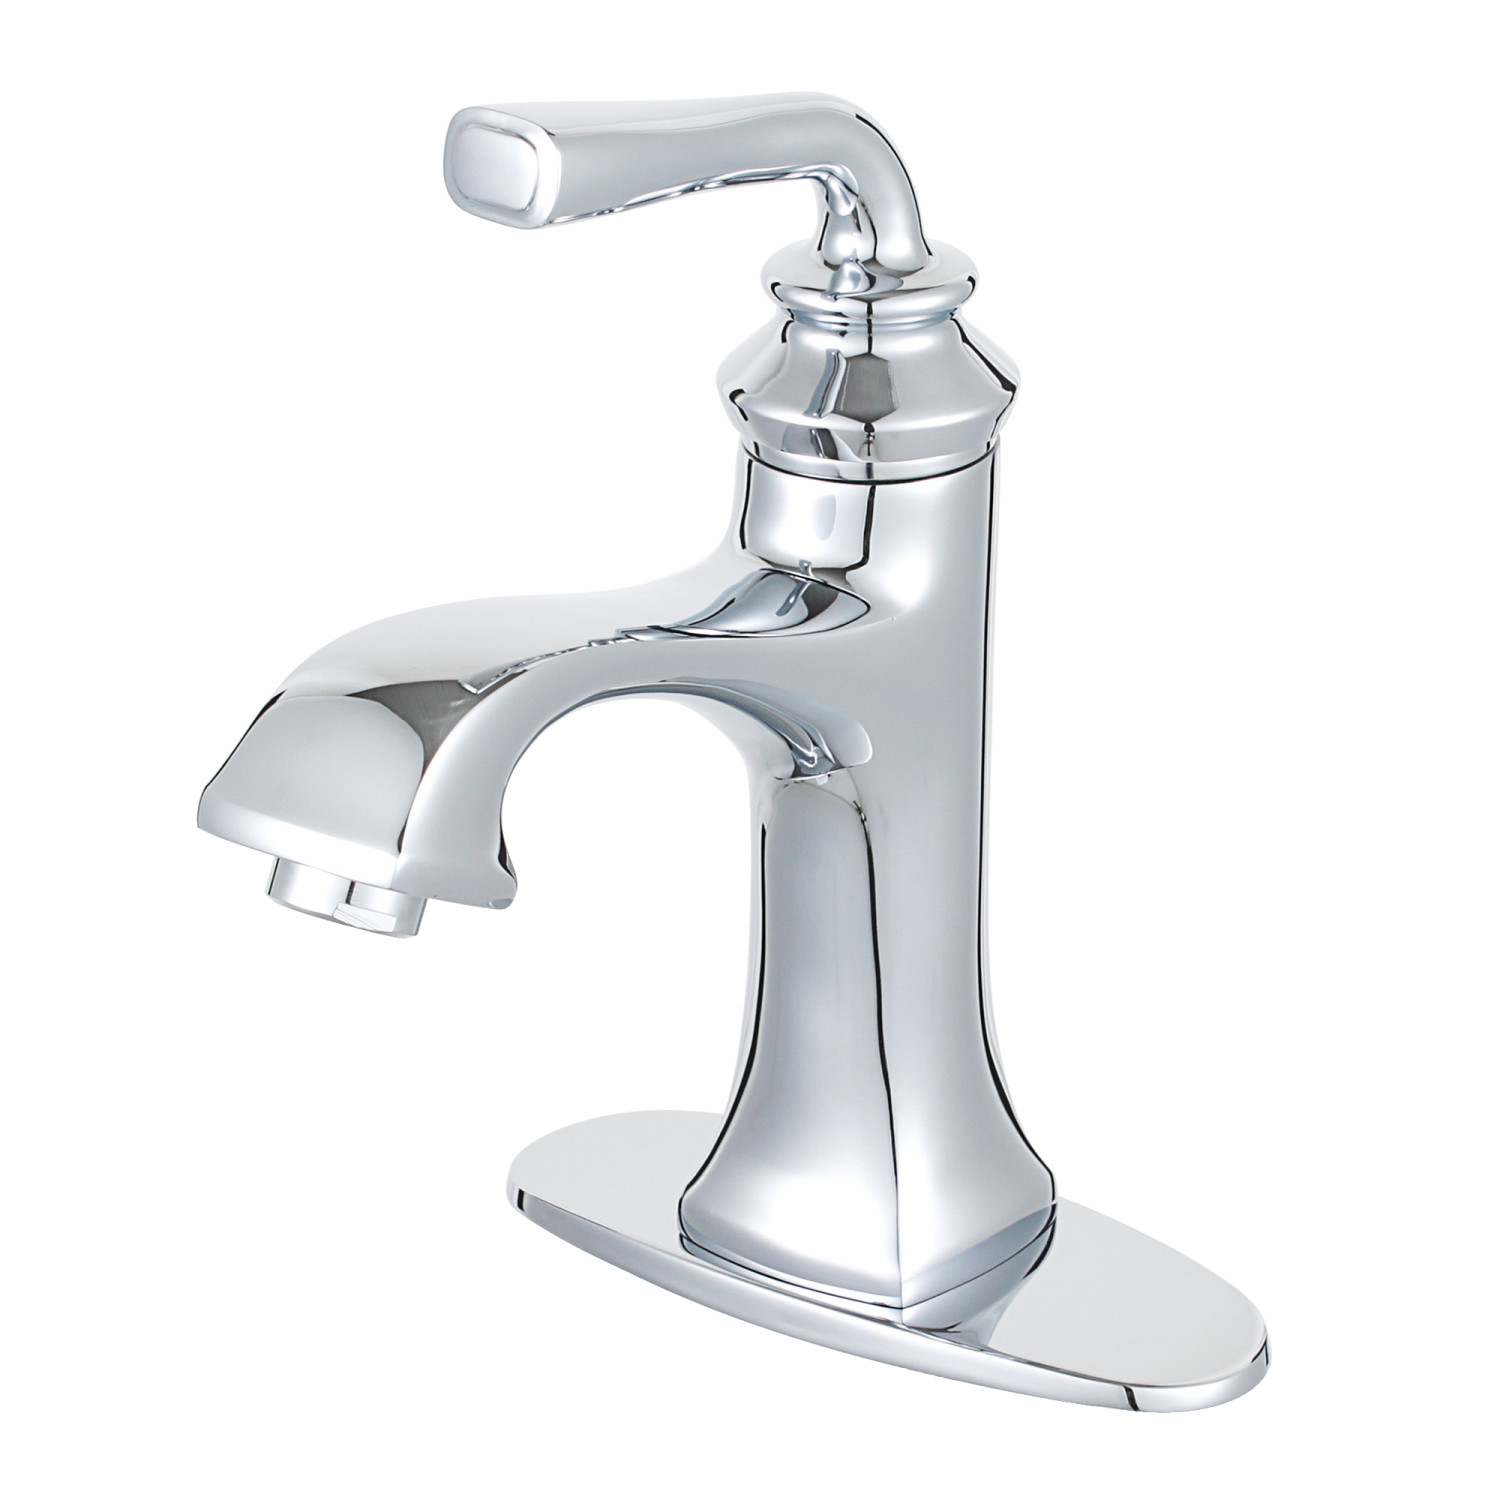 Single-Handle 1-Hole Deck Mounted Single-Handle Bathroom Faucet with Push-Up Drain and Deck Plate in Polished Chrome